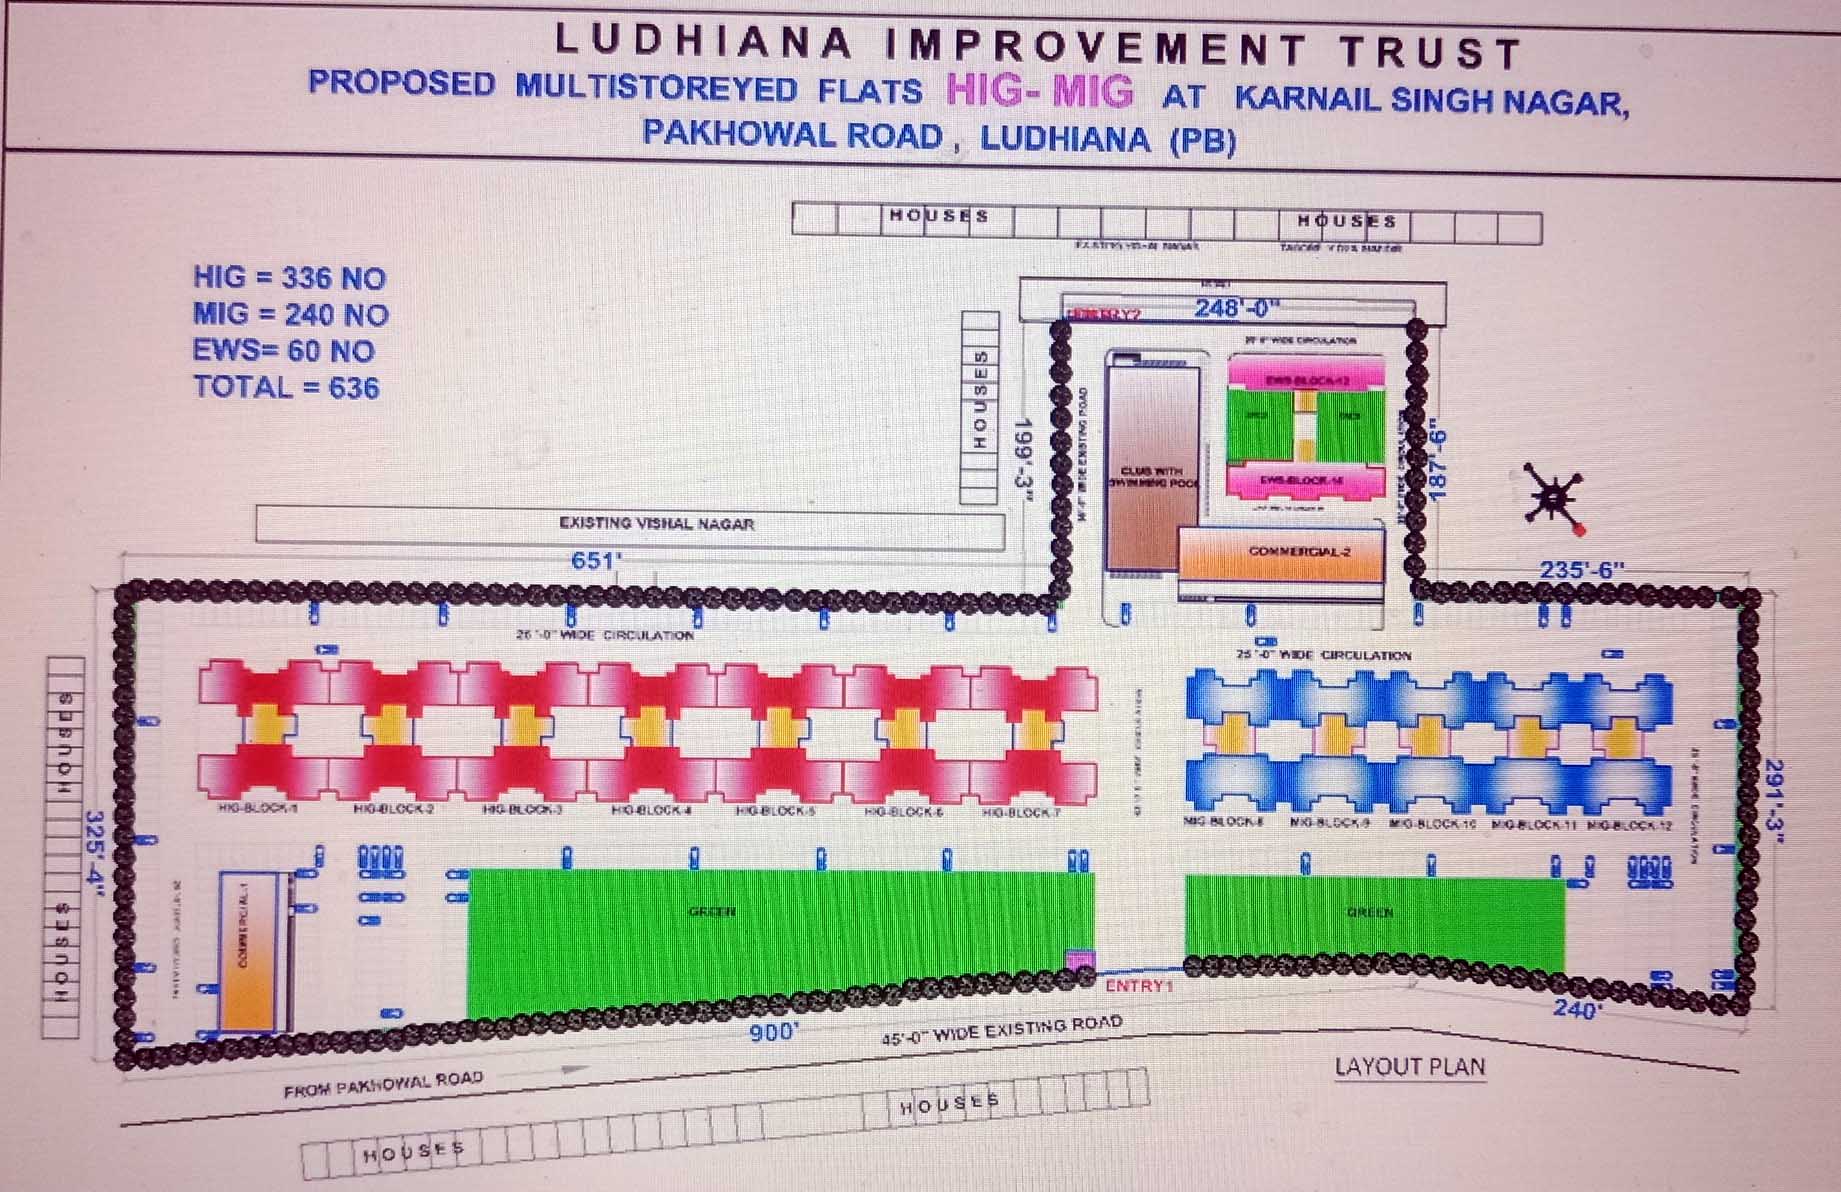 Atal apartments: Ludhiana Improvement Trust to hold draw of lots for allotment of flats on June 16